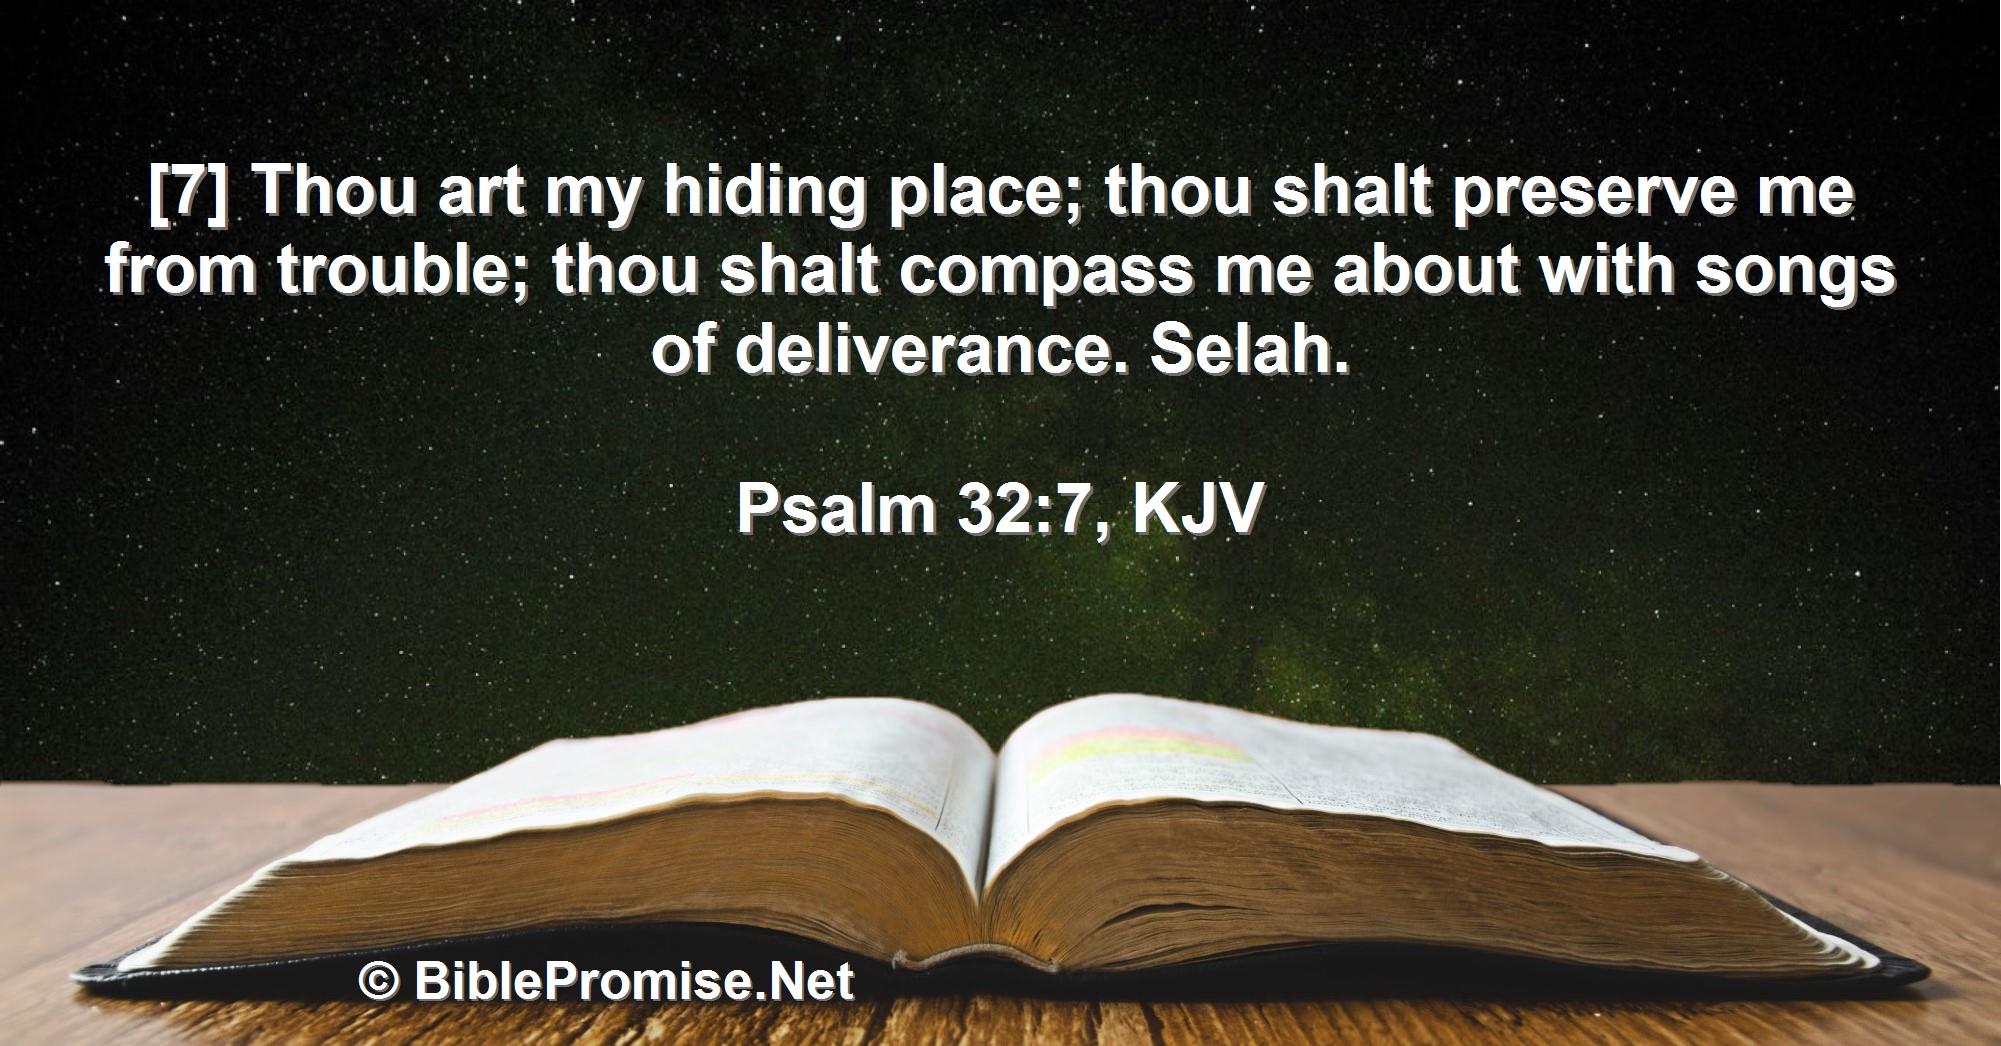 Monday, June 12, 2023 - Isaiah 35:4 (KJV) - Bible promise that God will come and save you.